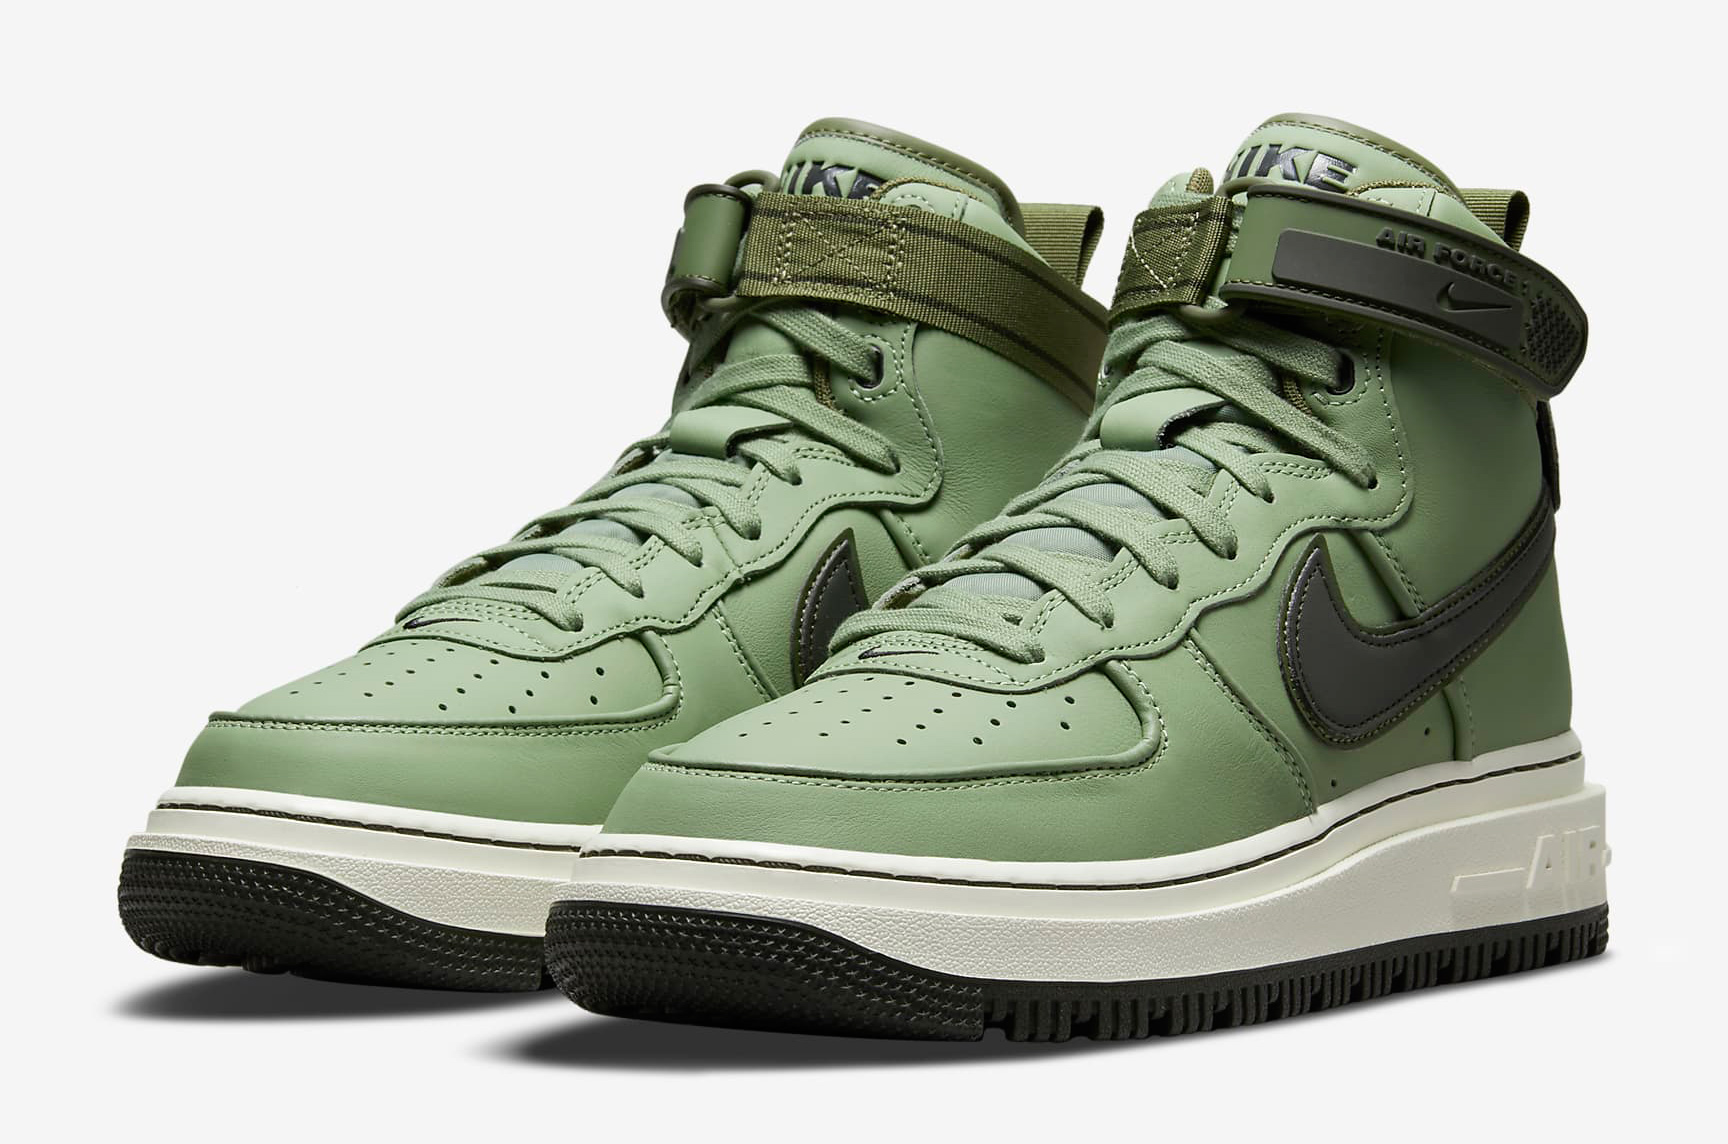 nike-air-force-1-boots-oil-green-medium-olive-1